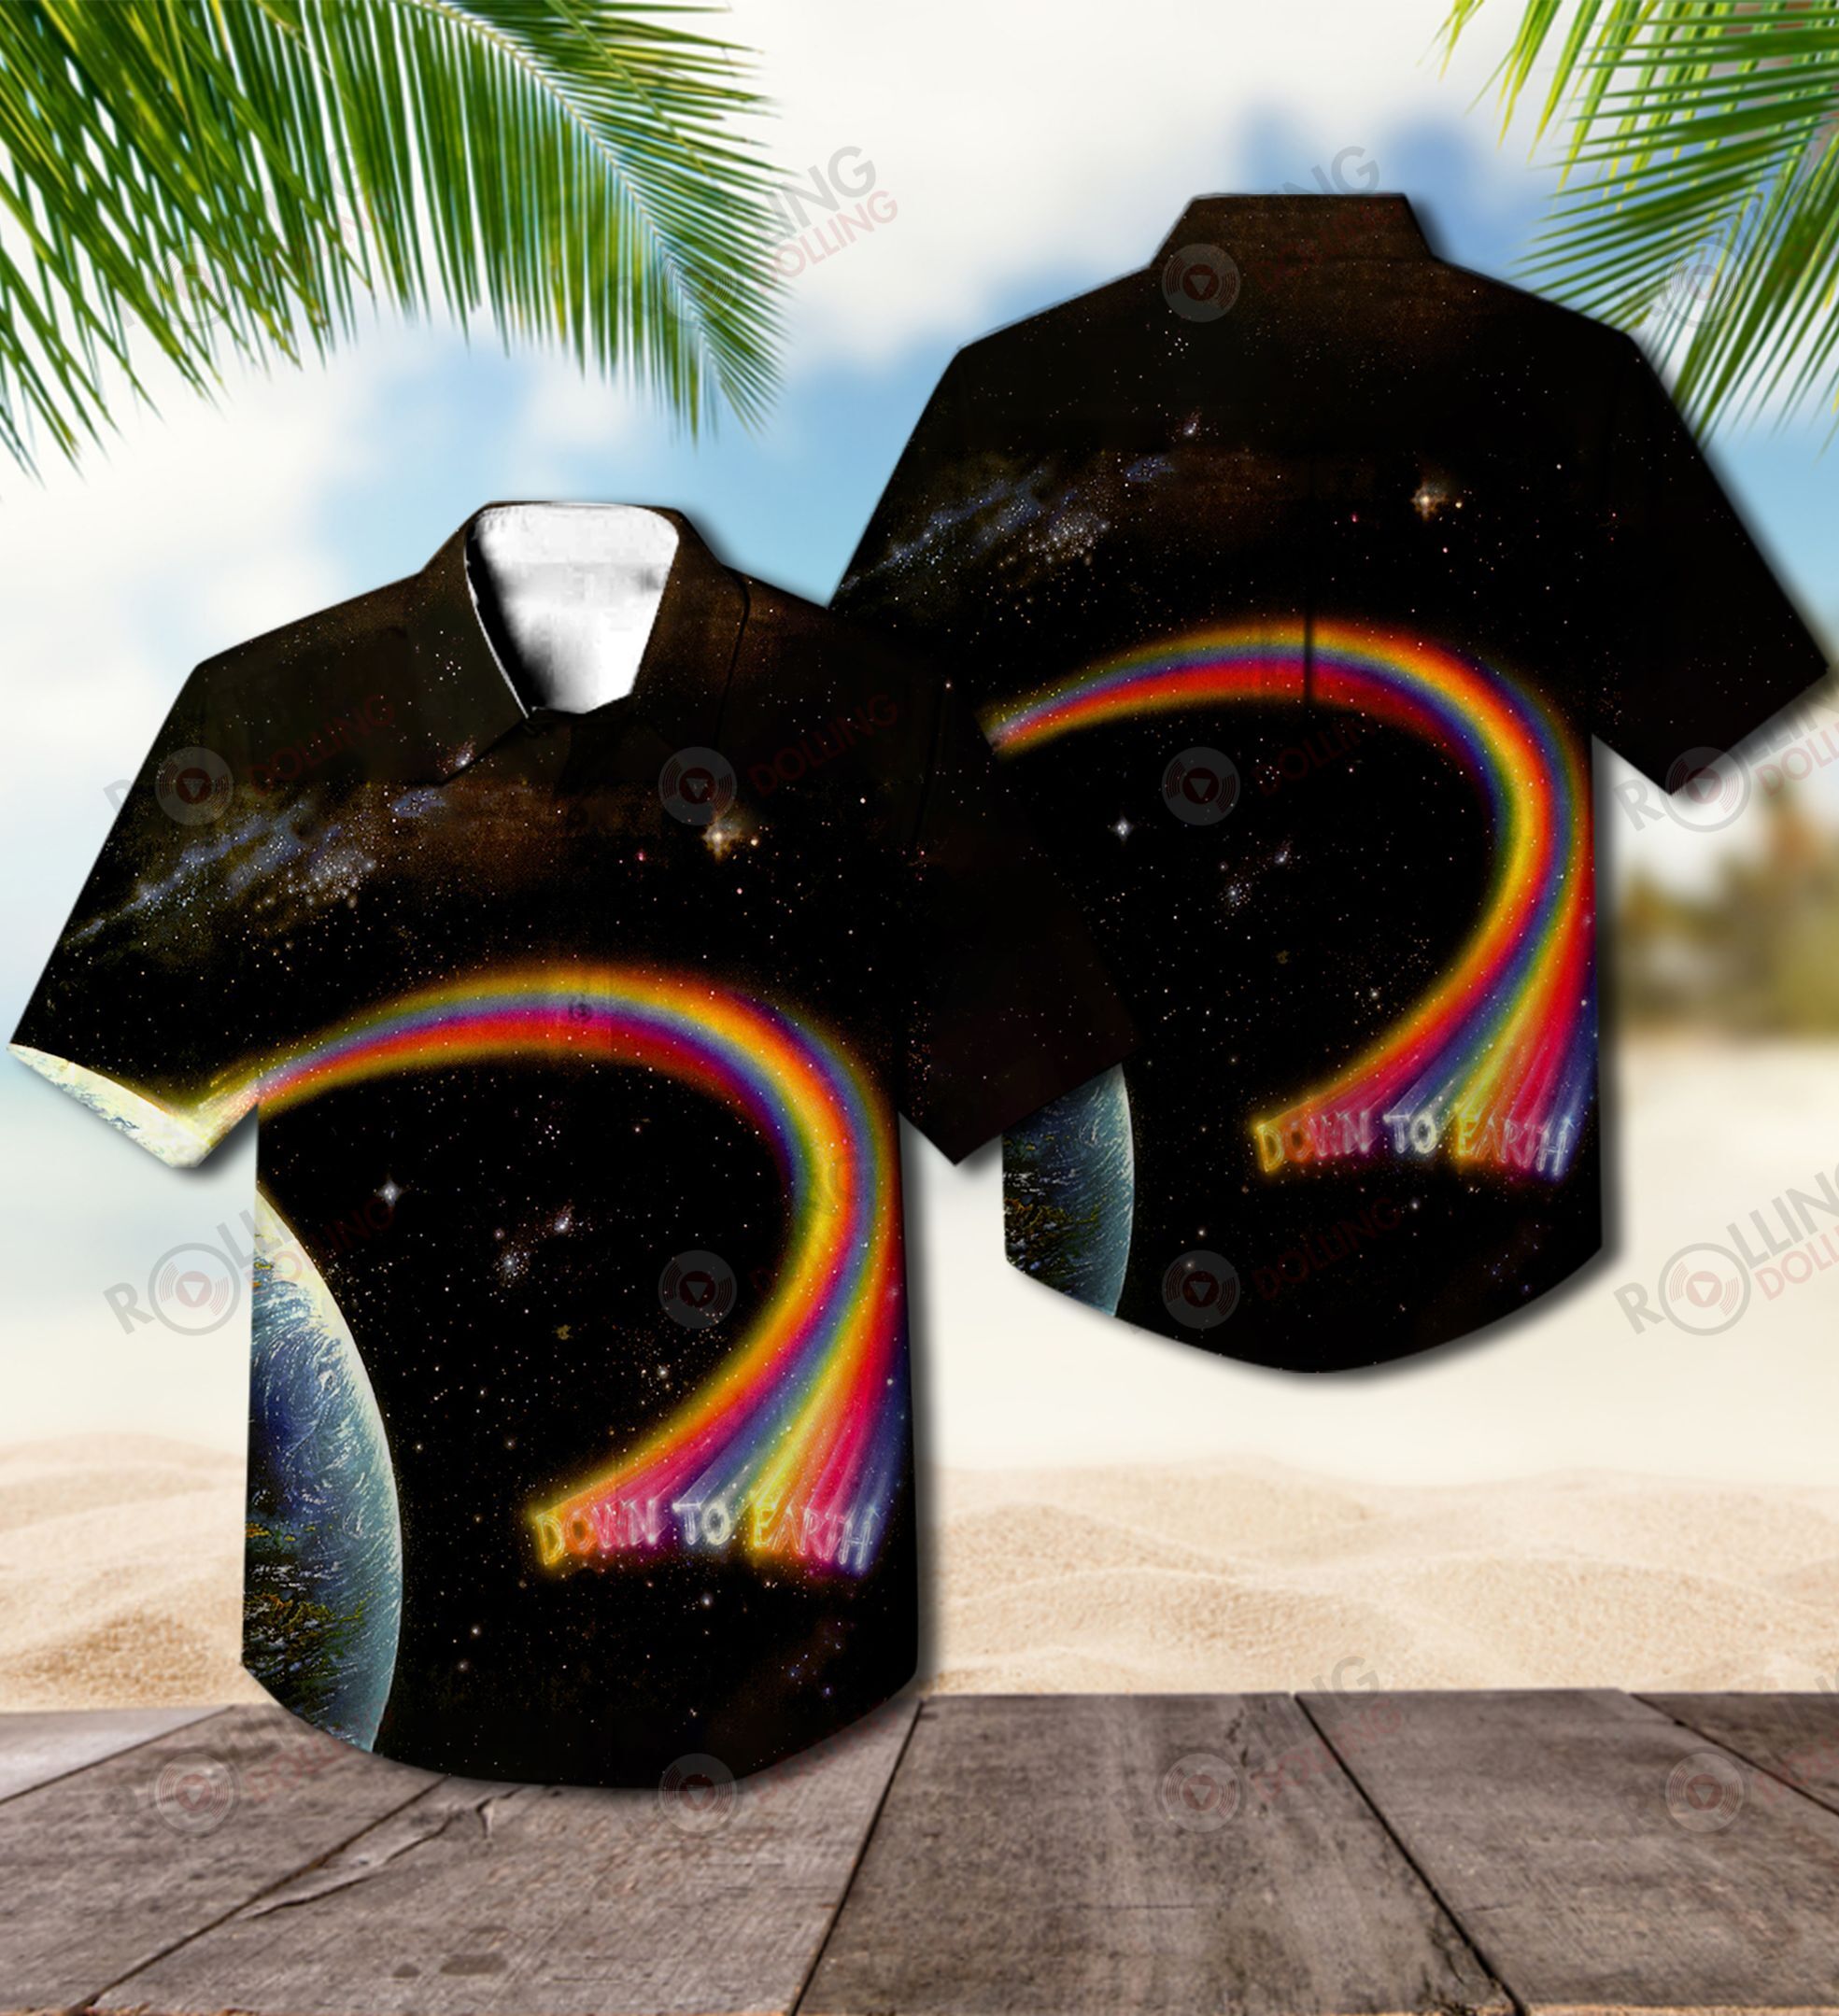 These Hawaiian Shirt will be a great choice for any type of occasion 207